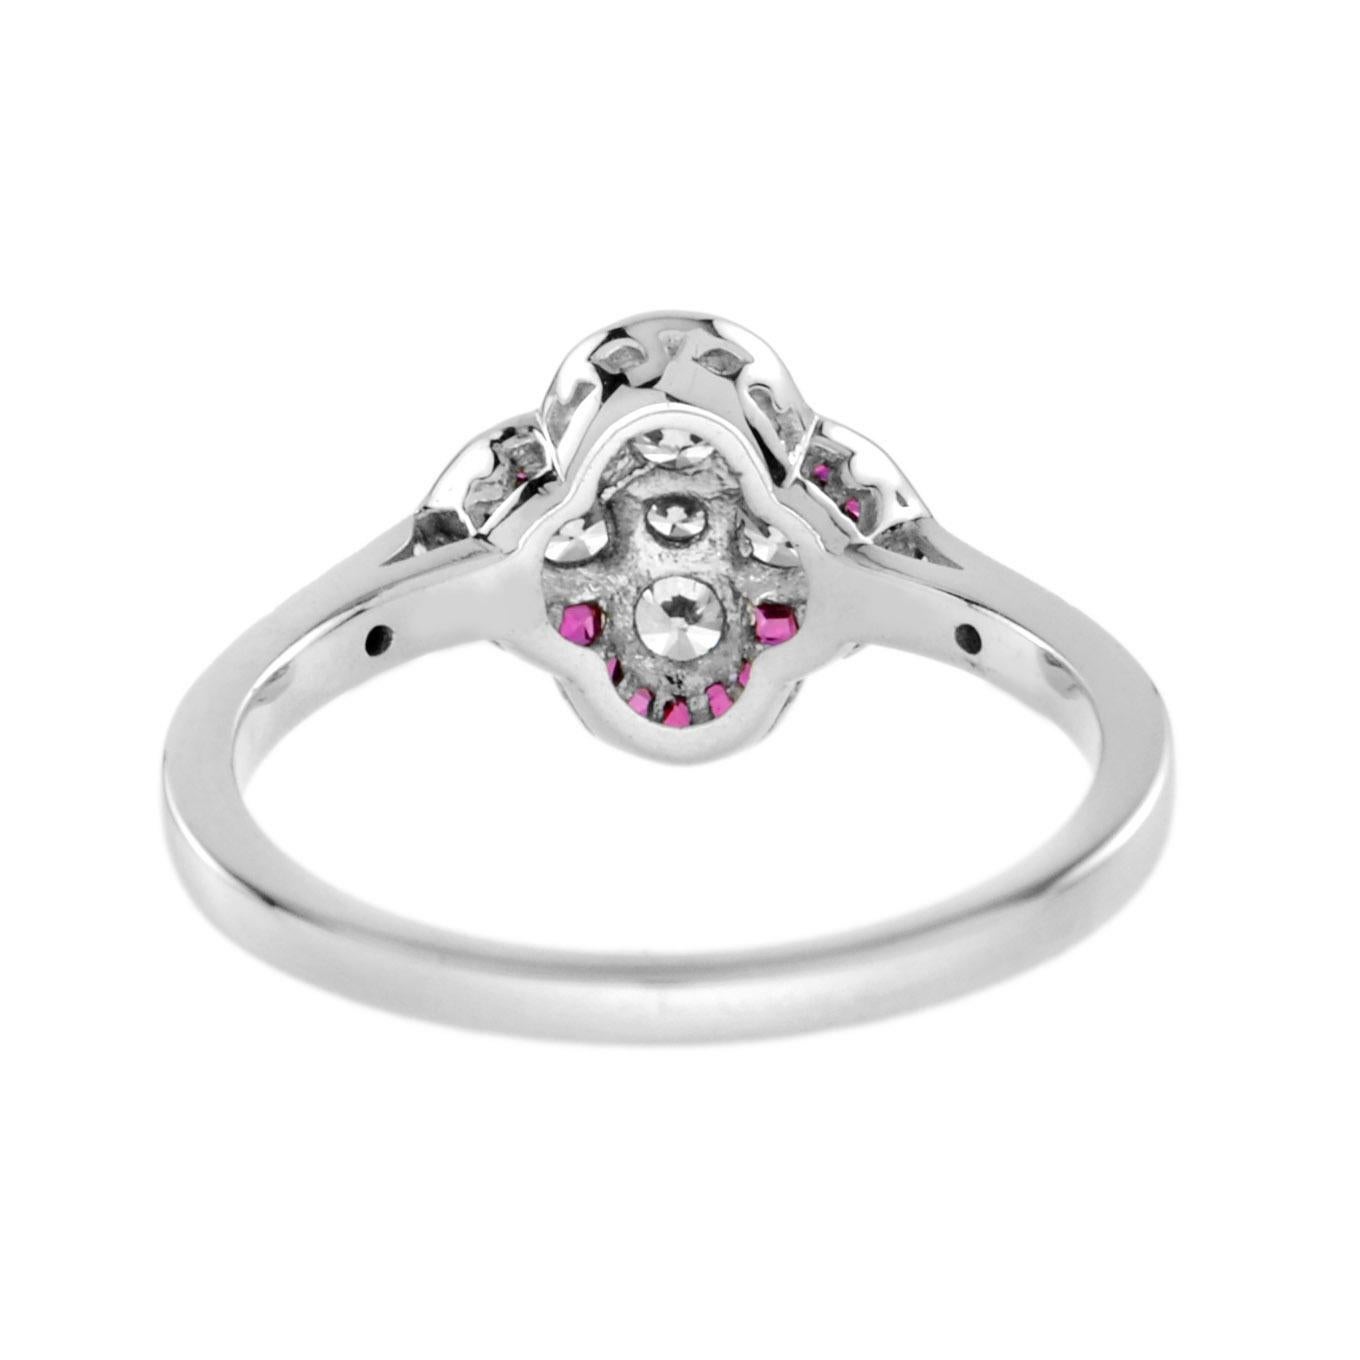 For Sale:  Diamond and Ruby Art Deco Style Floral Cluster Ring in 18K White Gold 4